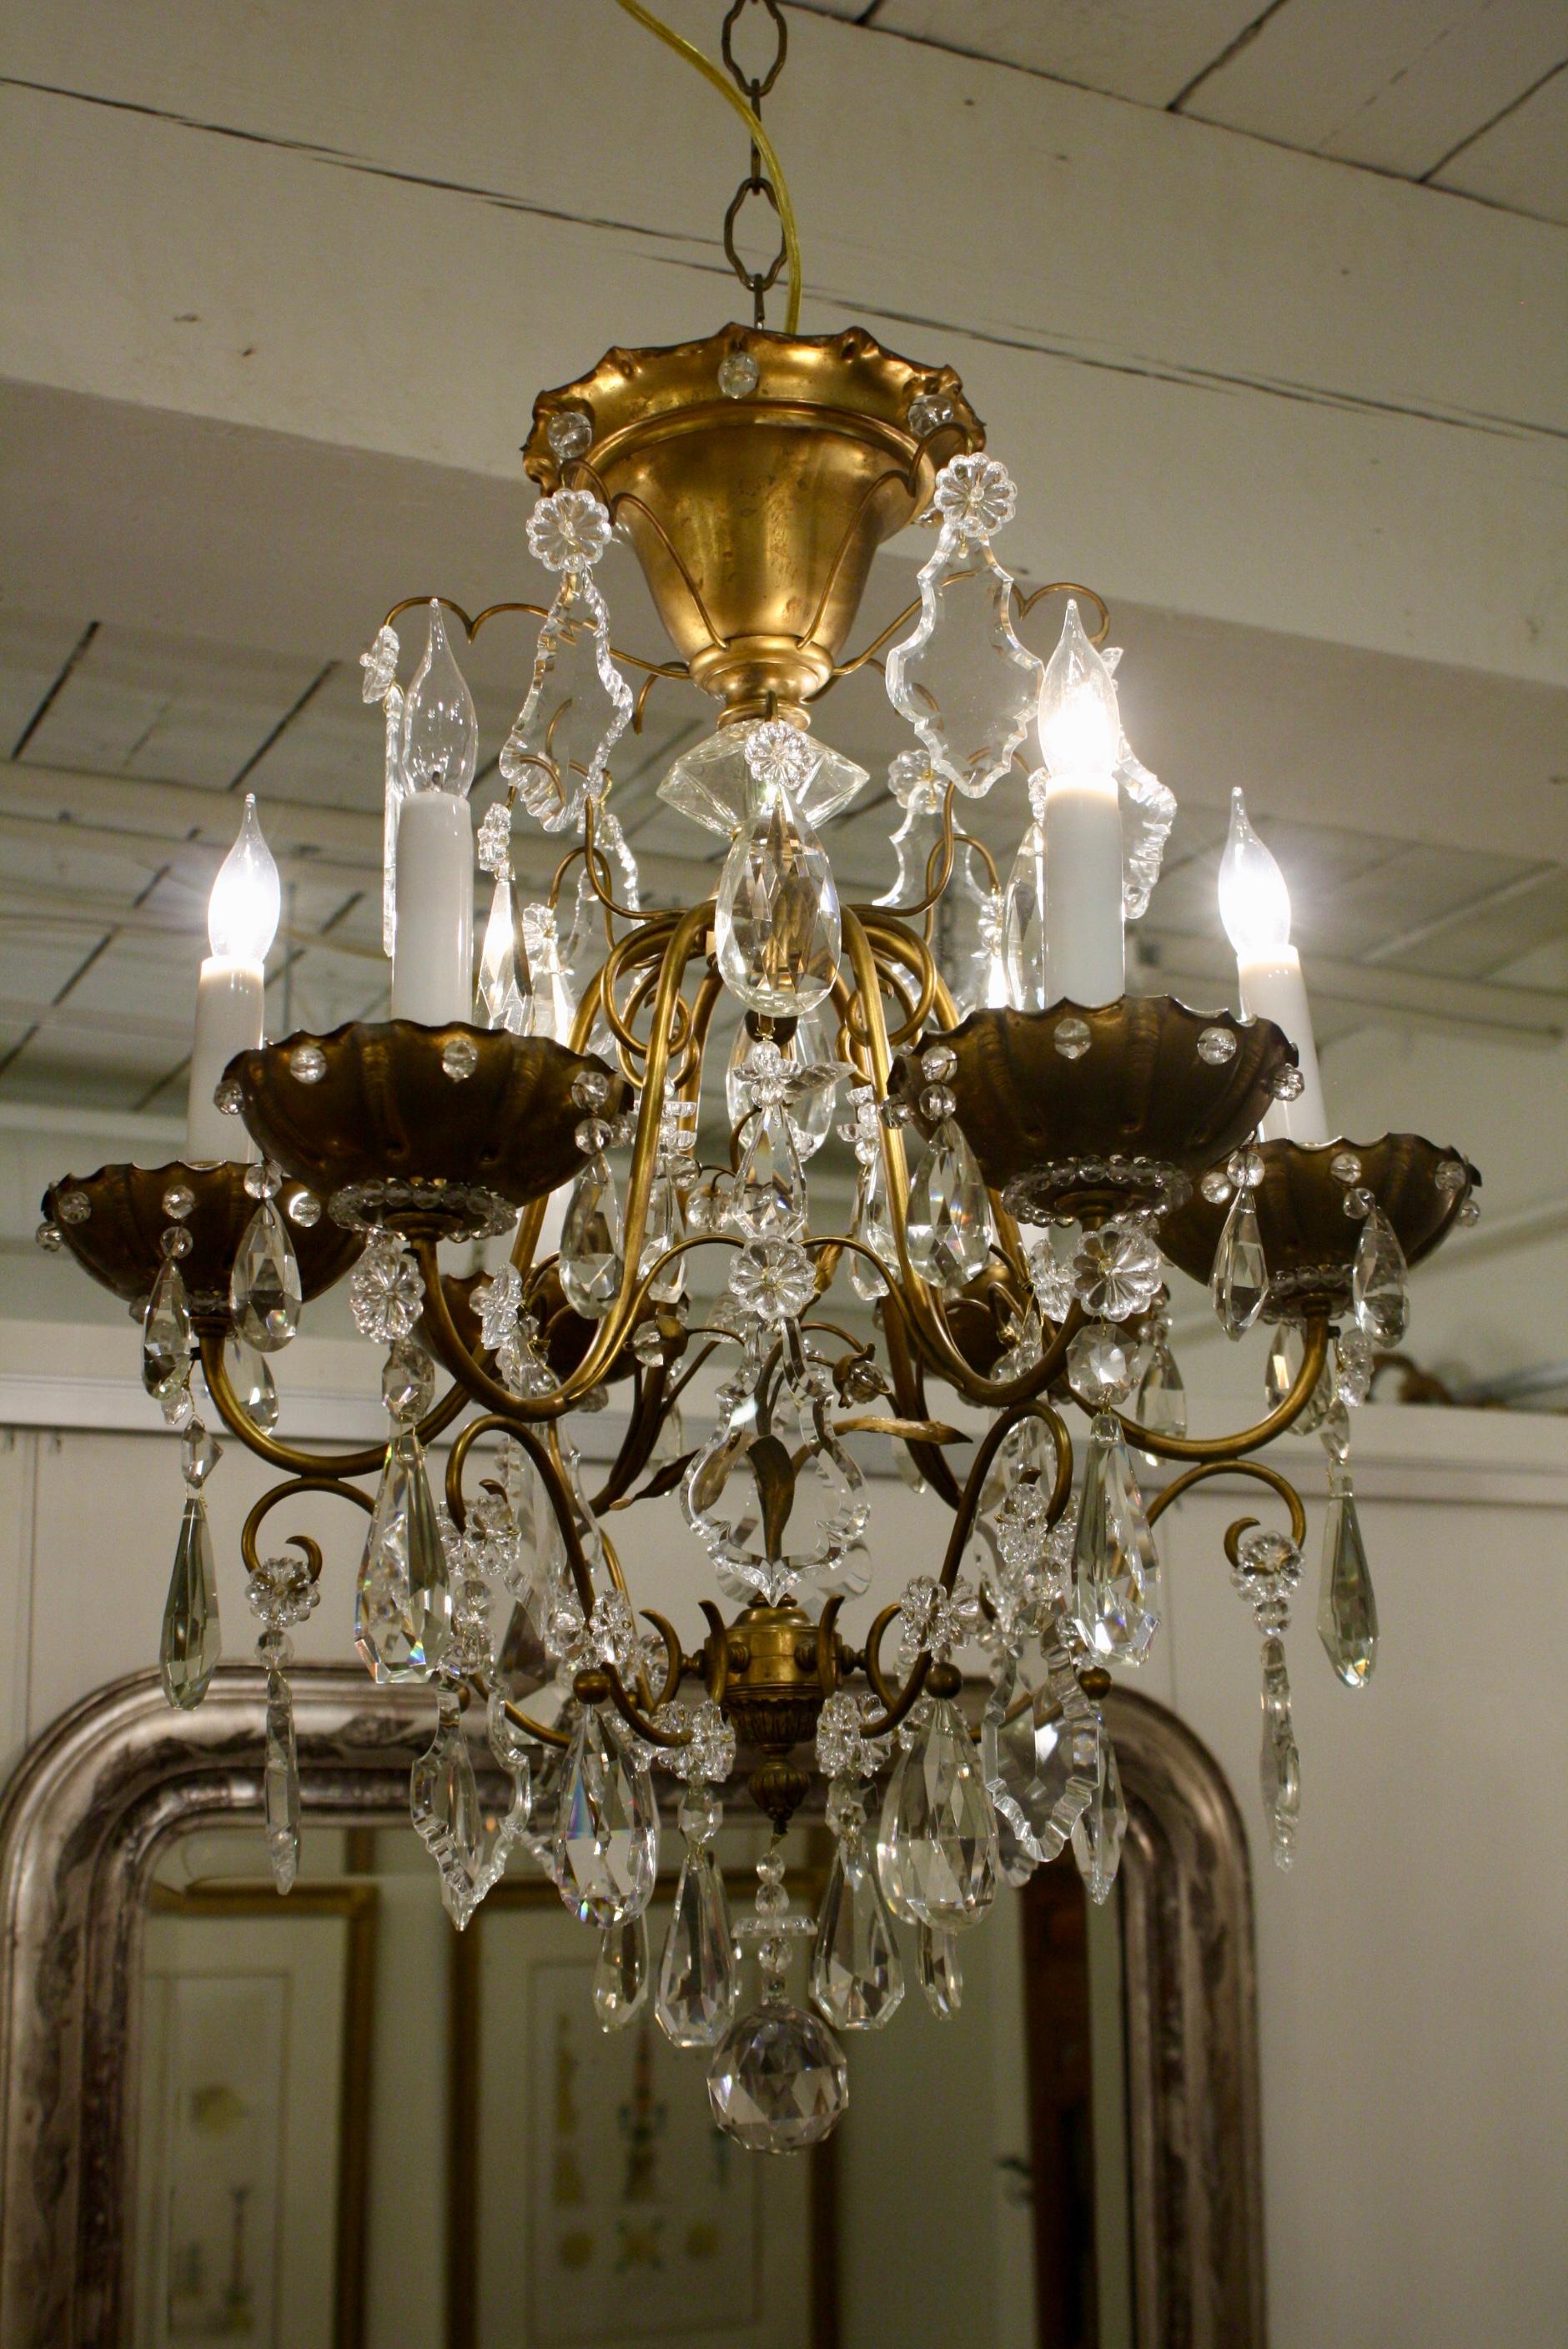 French bronze and crystal cage-form chandelier with six lights attributed to Maison Jansen. This chandelier is ornamented with a variety of different cut crystal pendalogues and pierced bobesches with crystal beads. The interior features a decorate